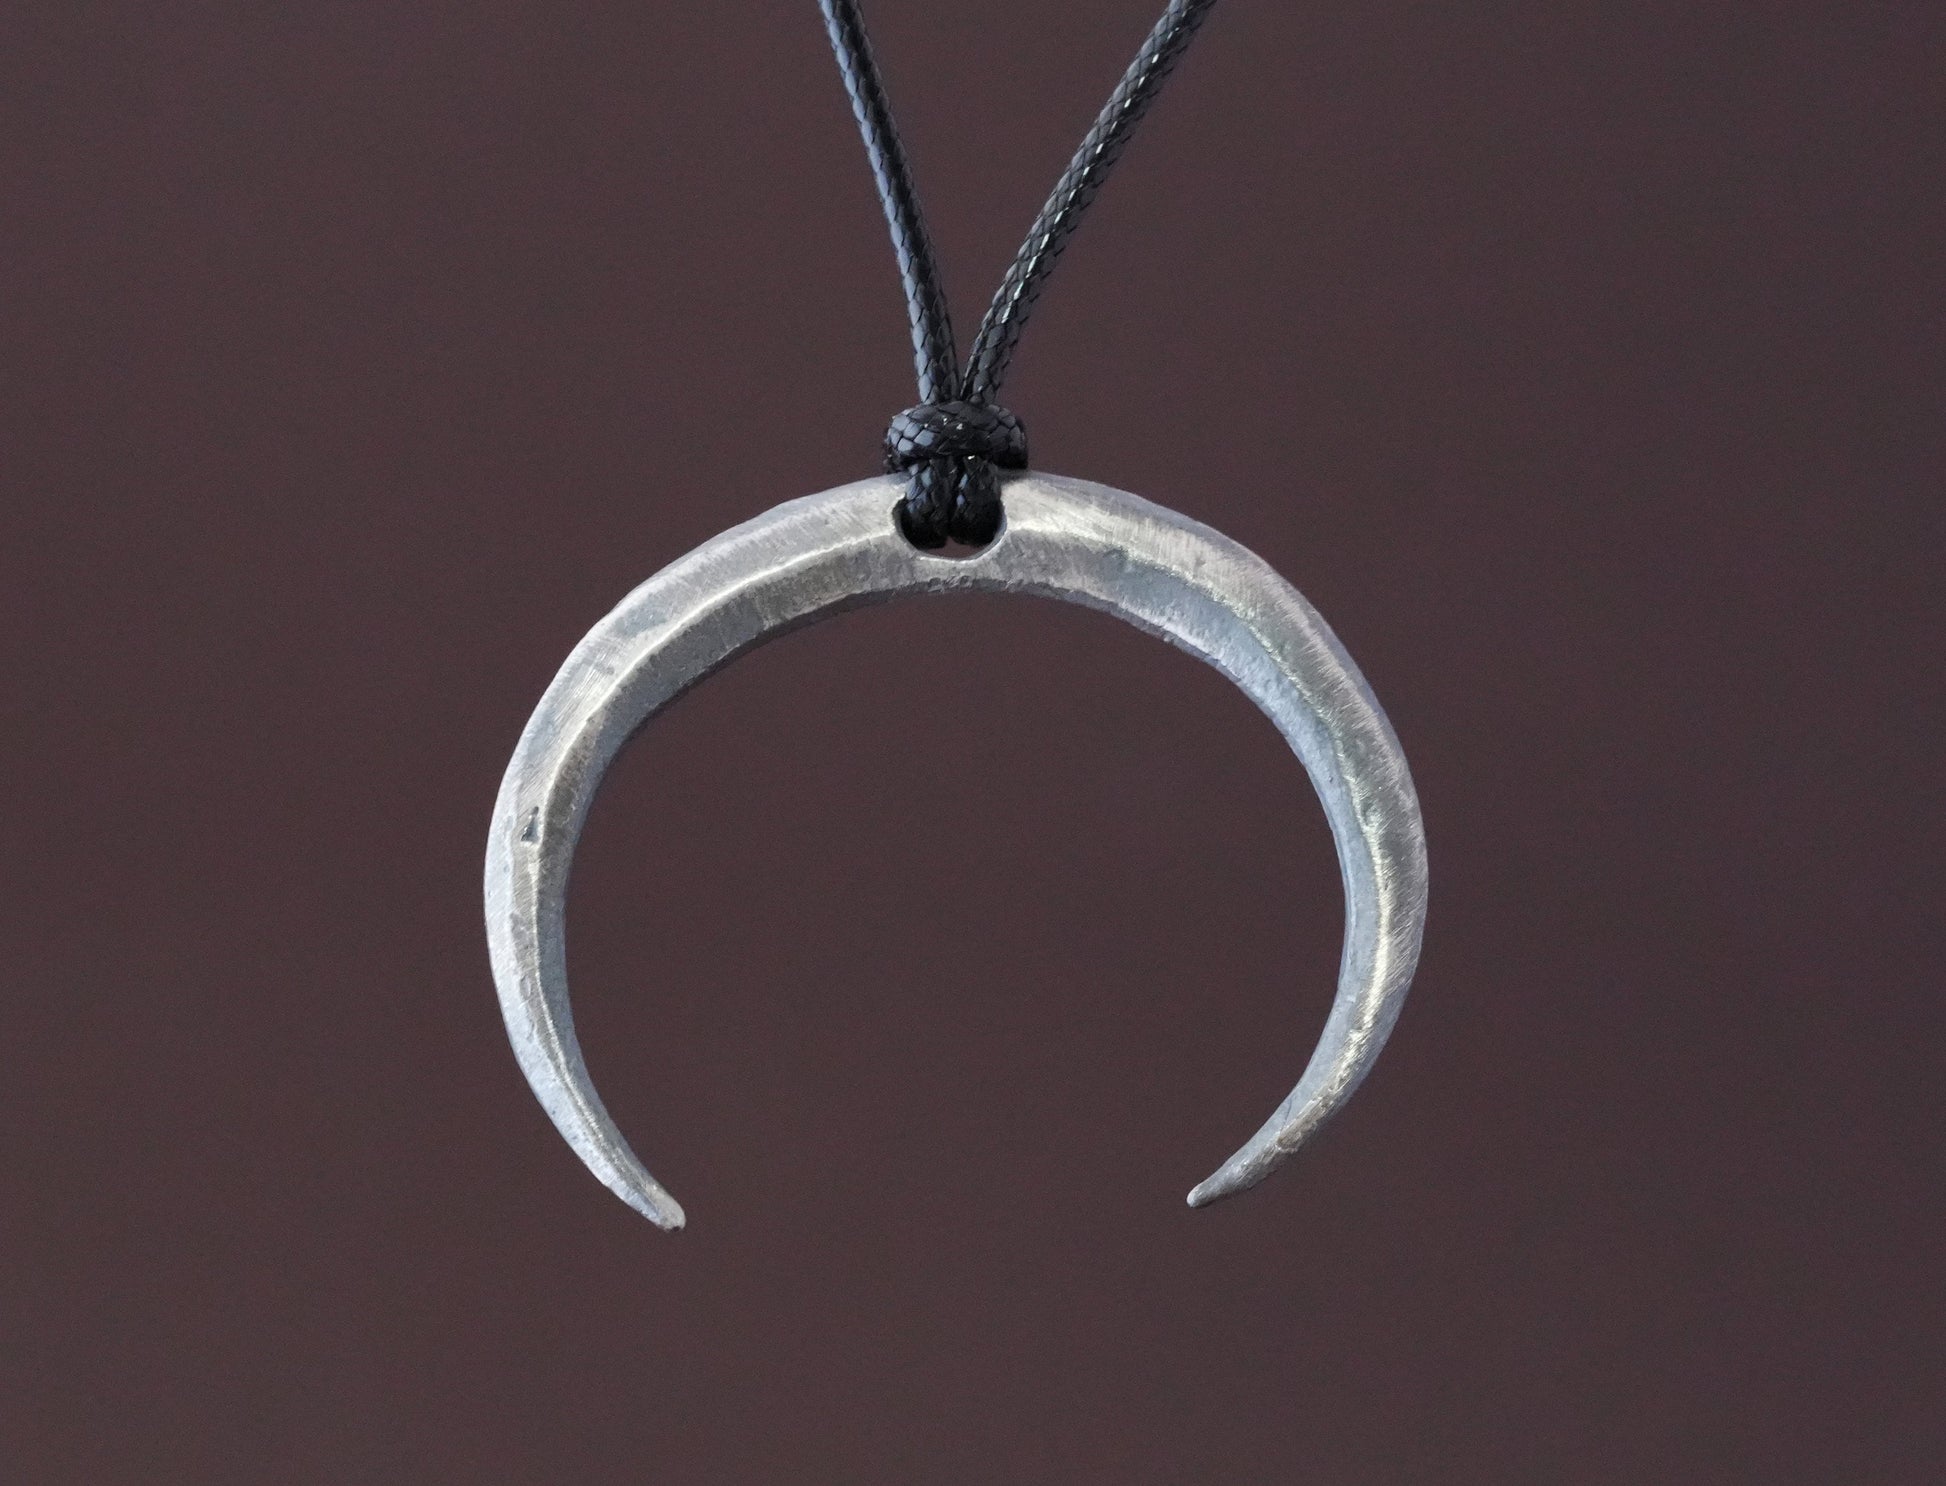 Extra Large Gothic Wiccan Pagan Witchcraft Crescent Moon Necklace Pendant With Adjustable String Charm Embracing Spiritual Universal Energy - Baldur Jewelry